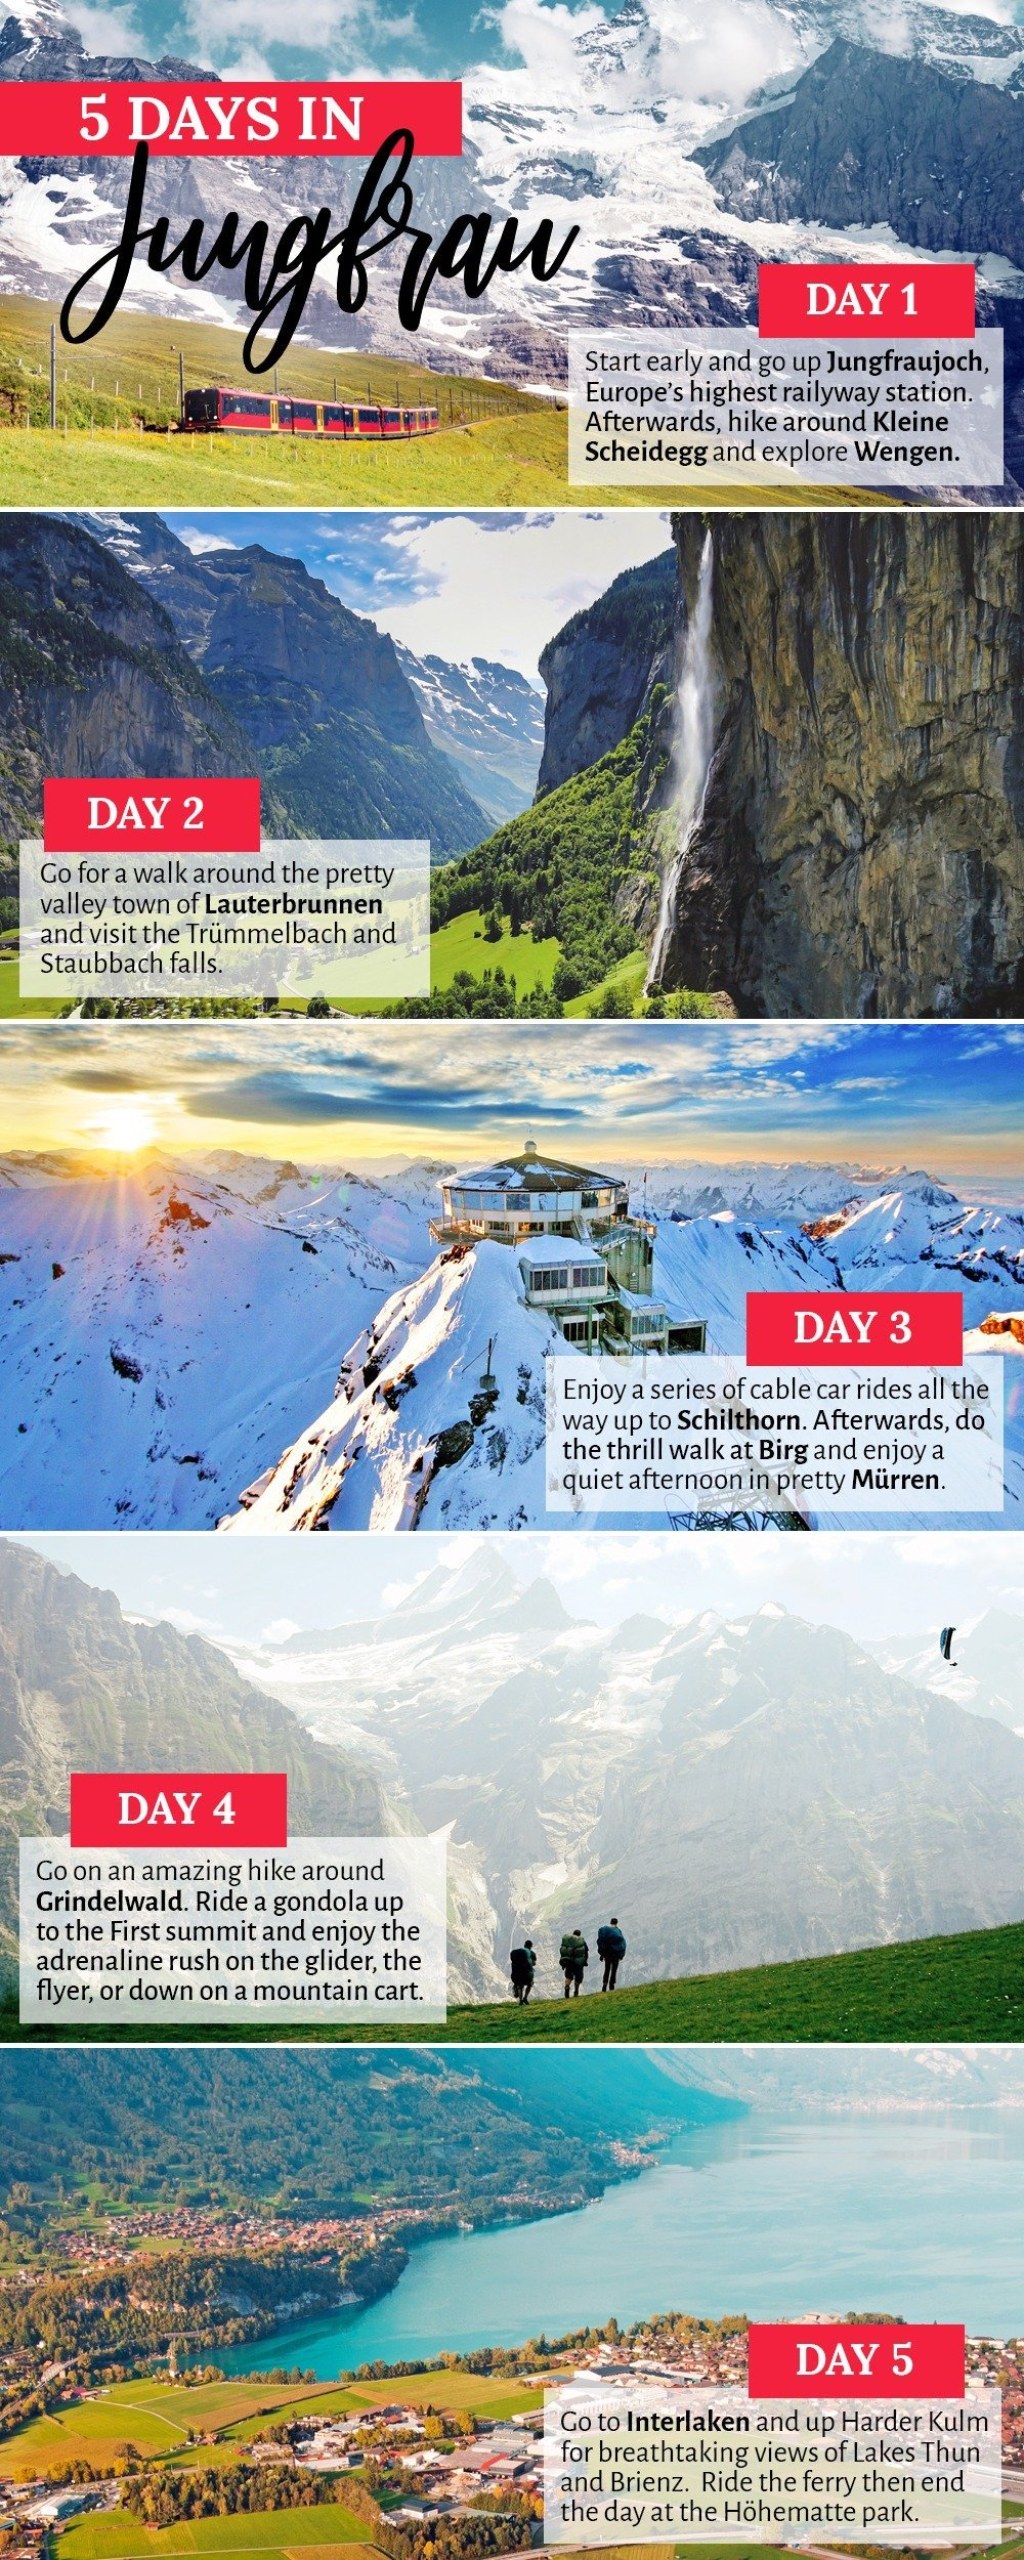 switzerland trip itinerary 5 days - days in Jungfrau - your travel guide to a wonderful Swiss holiday